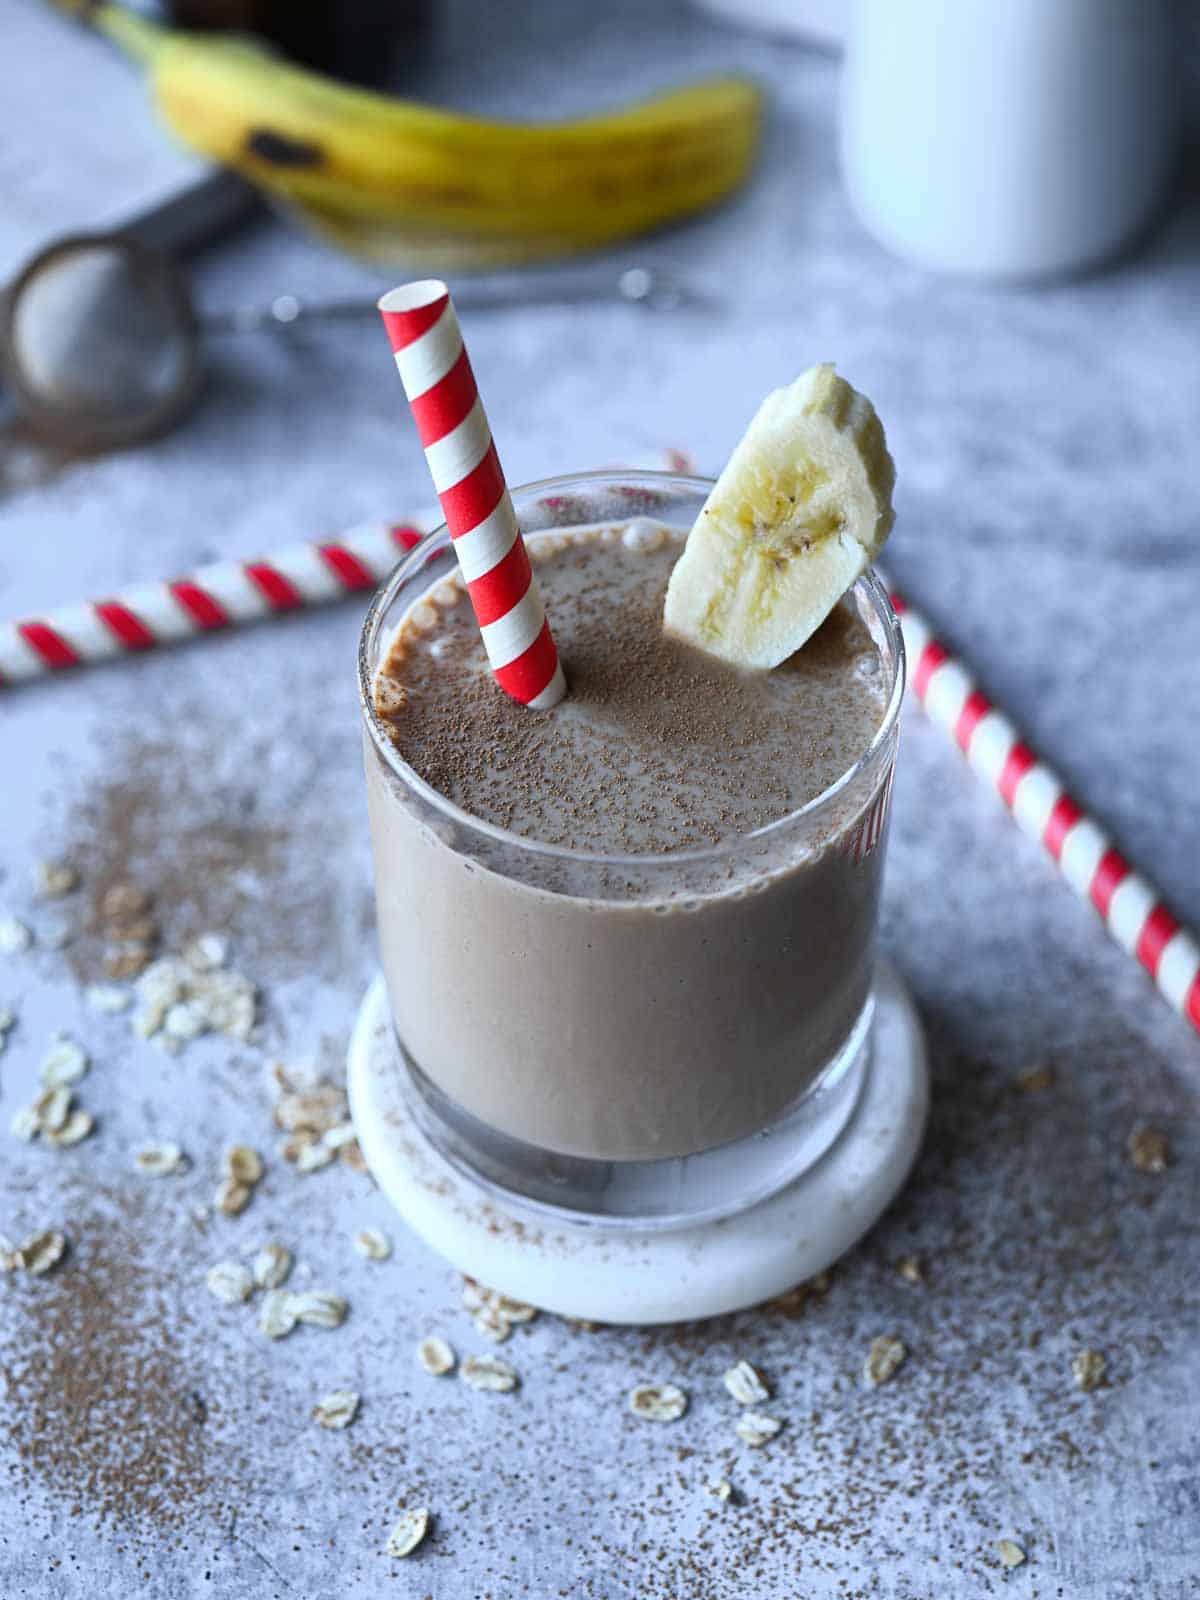 Overview of chocolate tahini oat milk smoothie in a clear glass with a red and white straw.